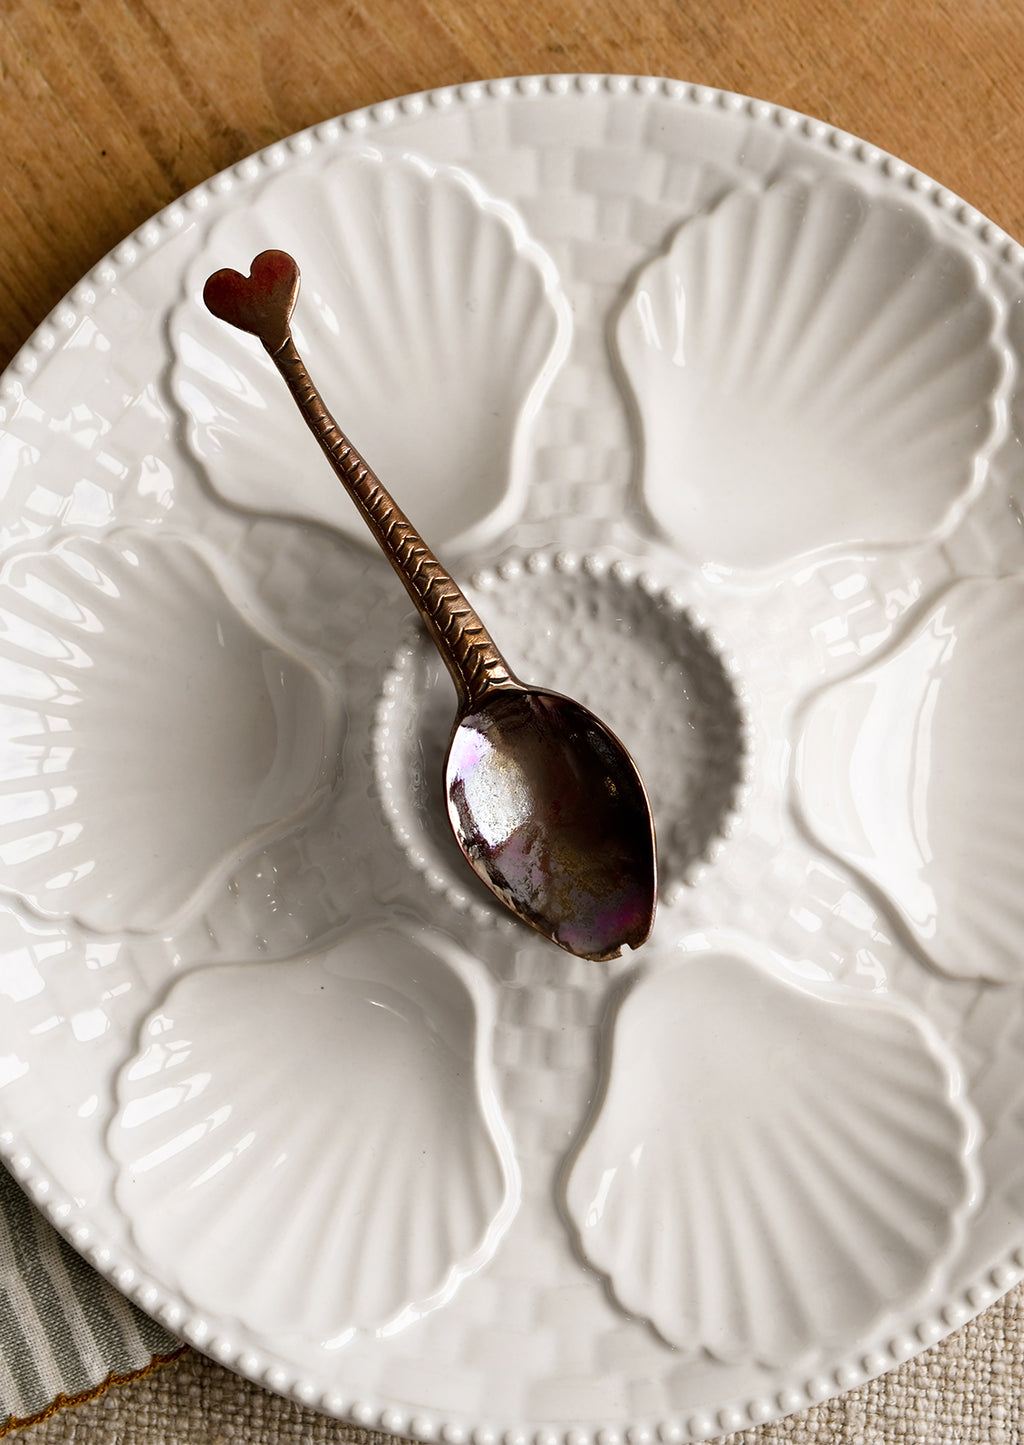 1: A glossy white ceramic plate with shell design.